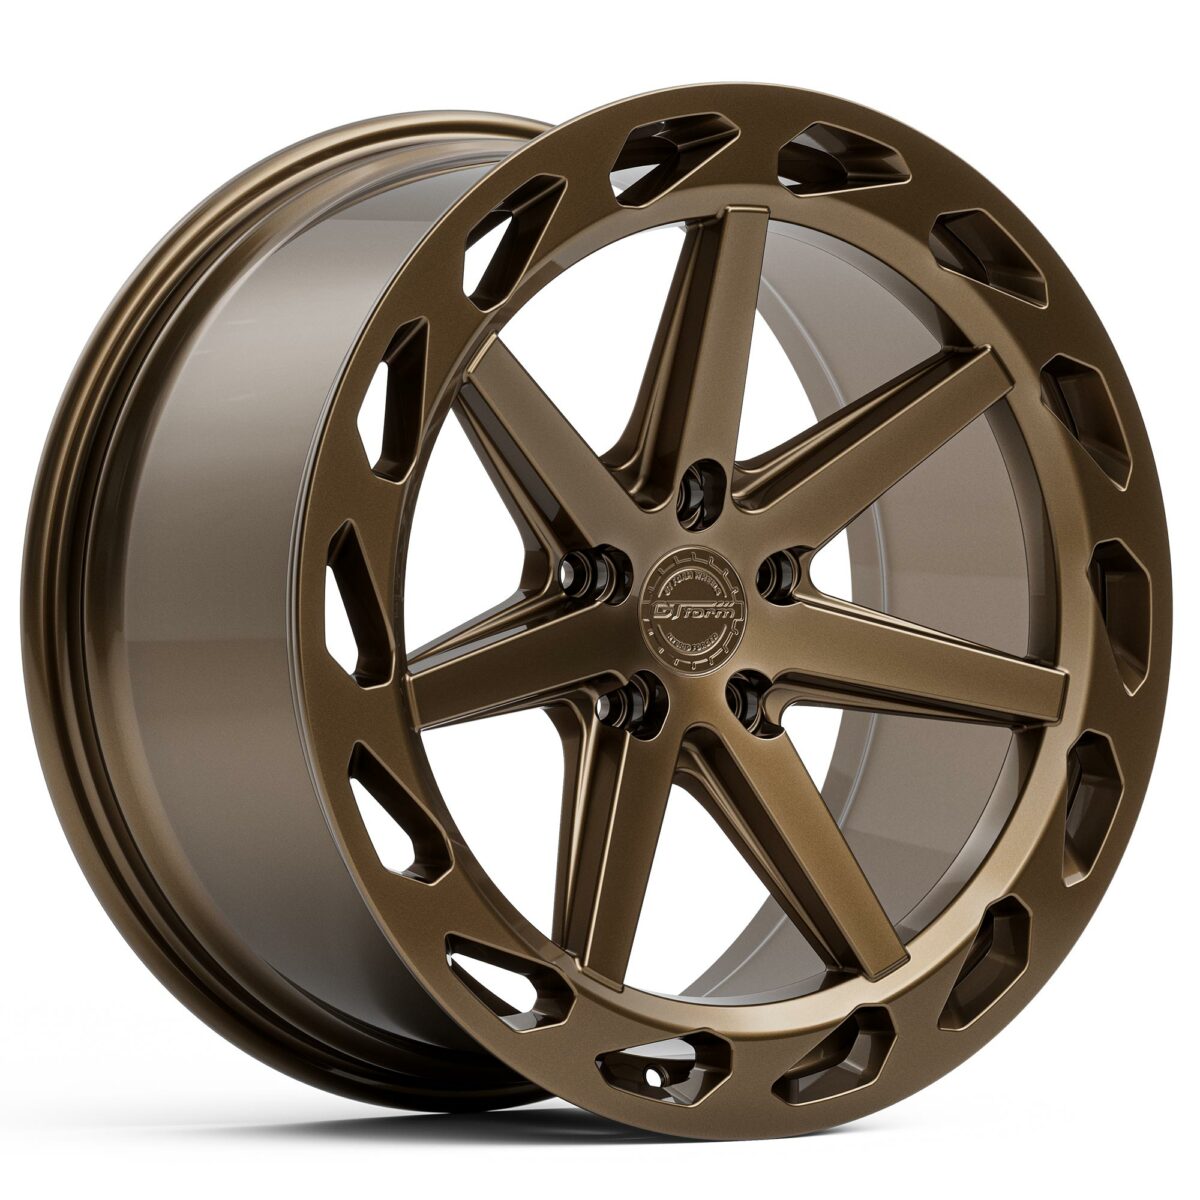 PERFORMANCE WHEELS GT FORM HF4.1 HYBRID FORGED GLOSS BRONZE 20X9 20X10 20X11 STAGGERED RIMS